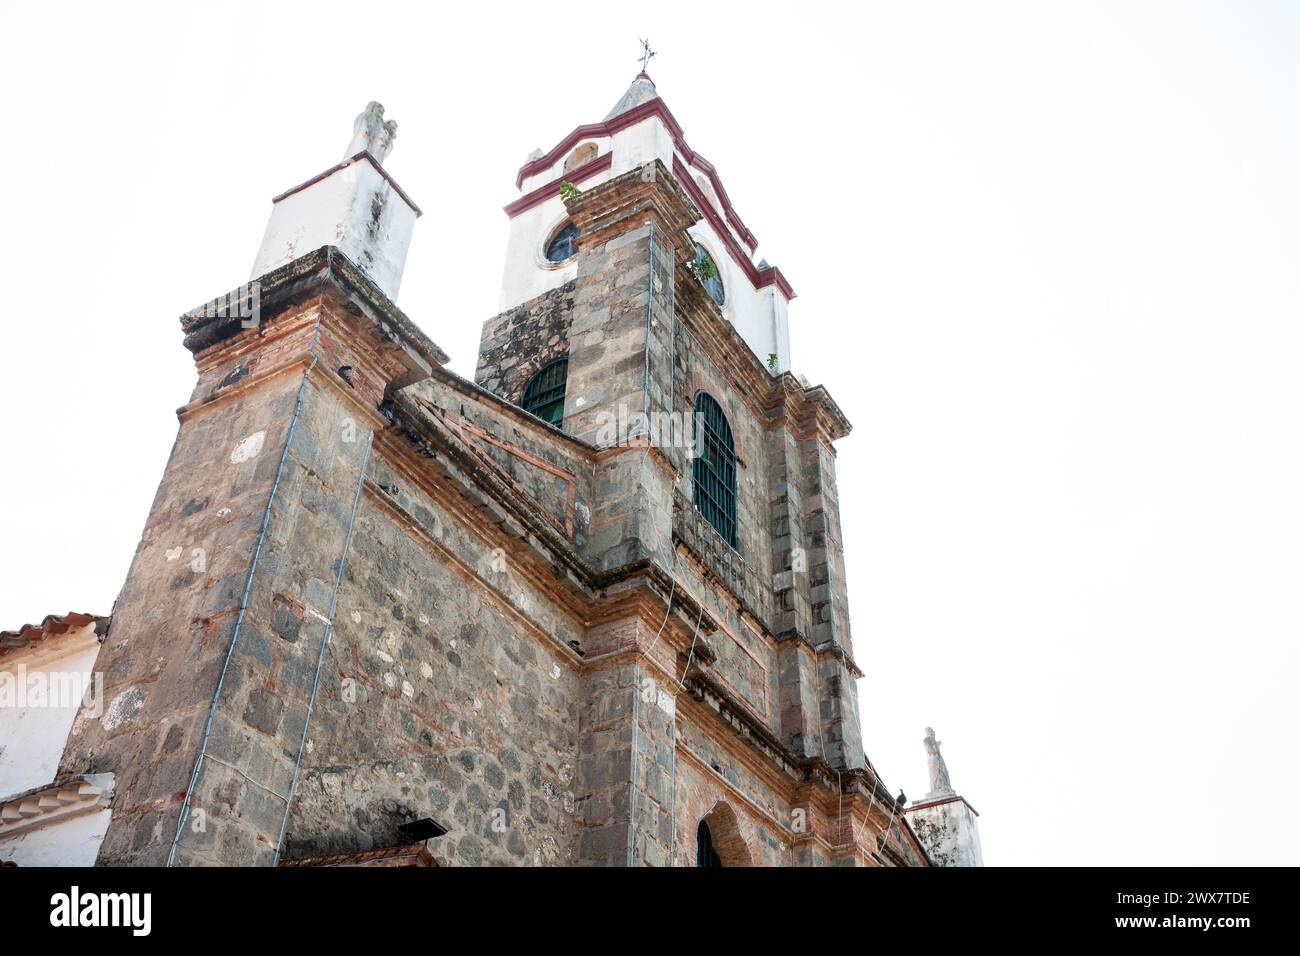 Historical Cathedral of Our Lady of the Rosary built in the 17th century in the heritage town of Honda located at the department of Tolima in Colombia Stock Photo